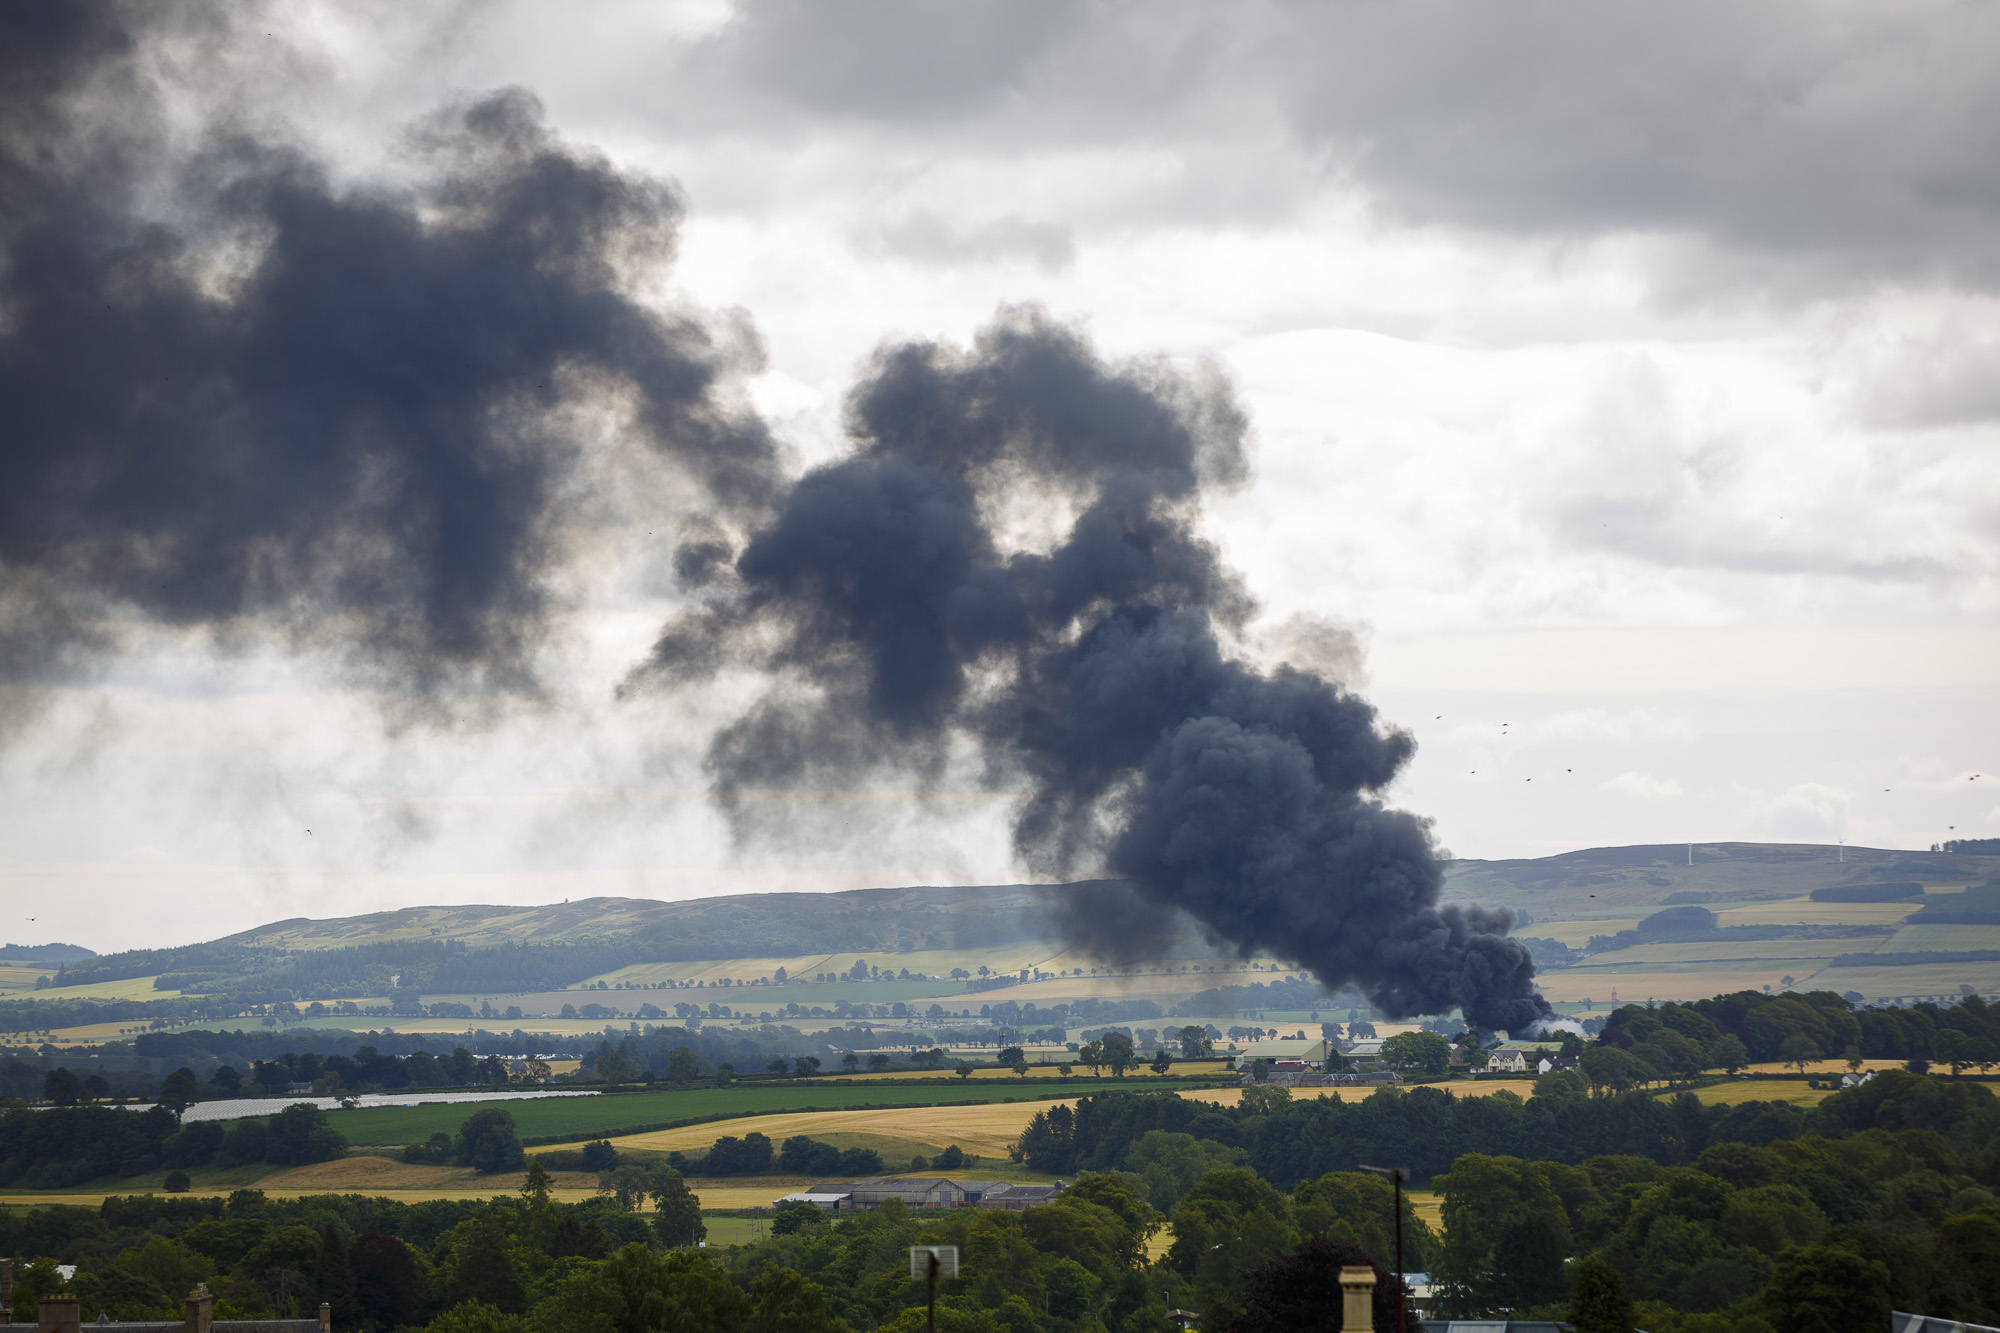 Councillor Angus Forbes took this dramatic photo of the Blairgowrie blaze.